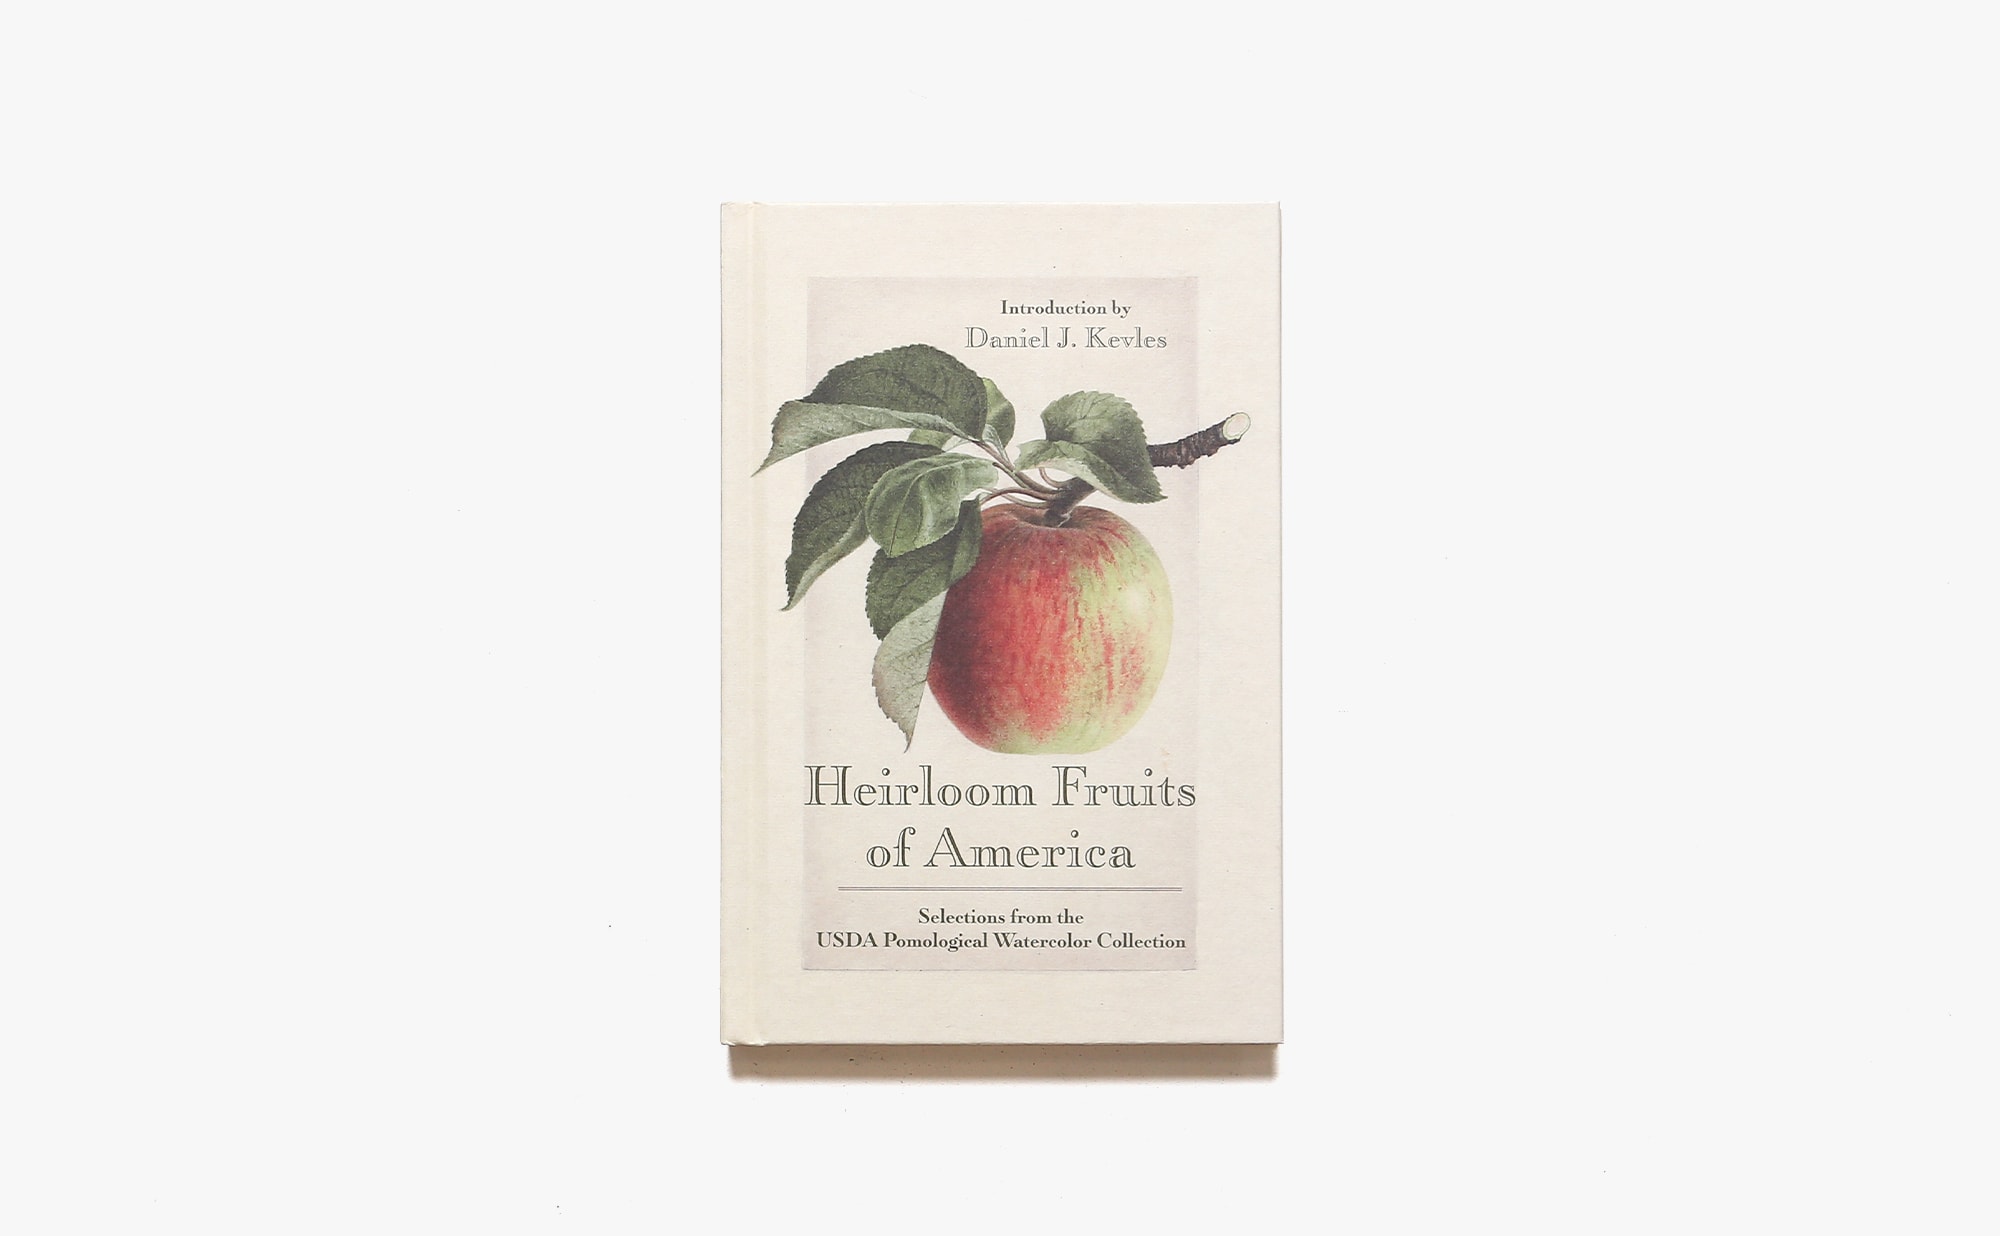 Heirloom Fruits of America: Selections from the USDA Watercolor Pomological Collection